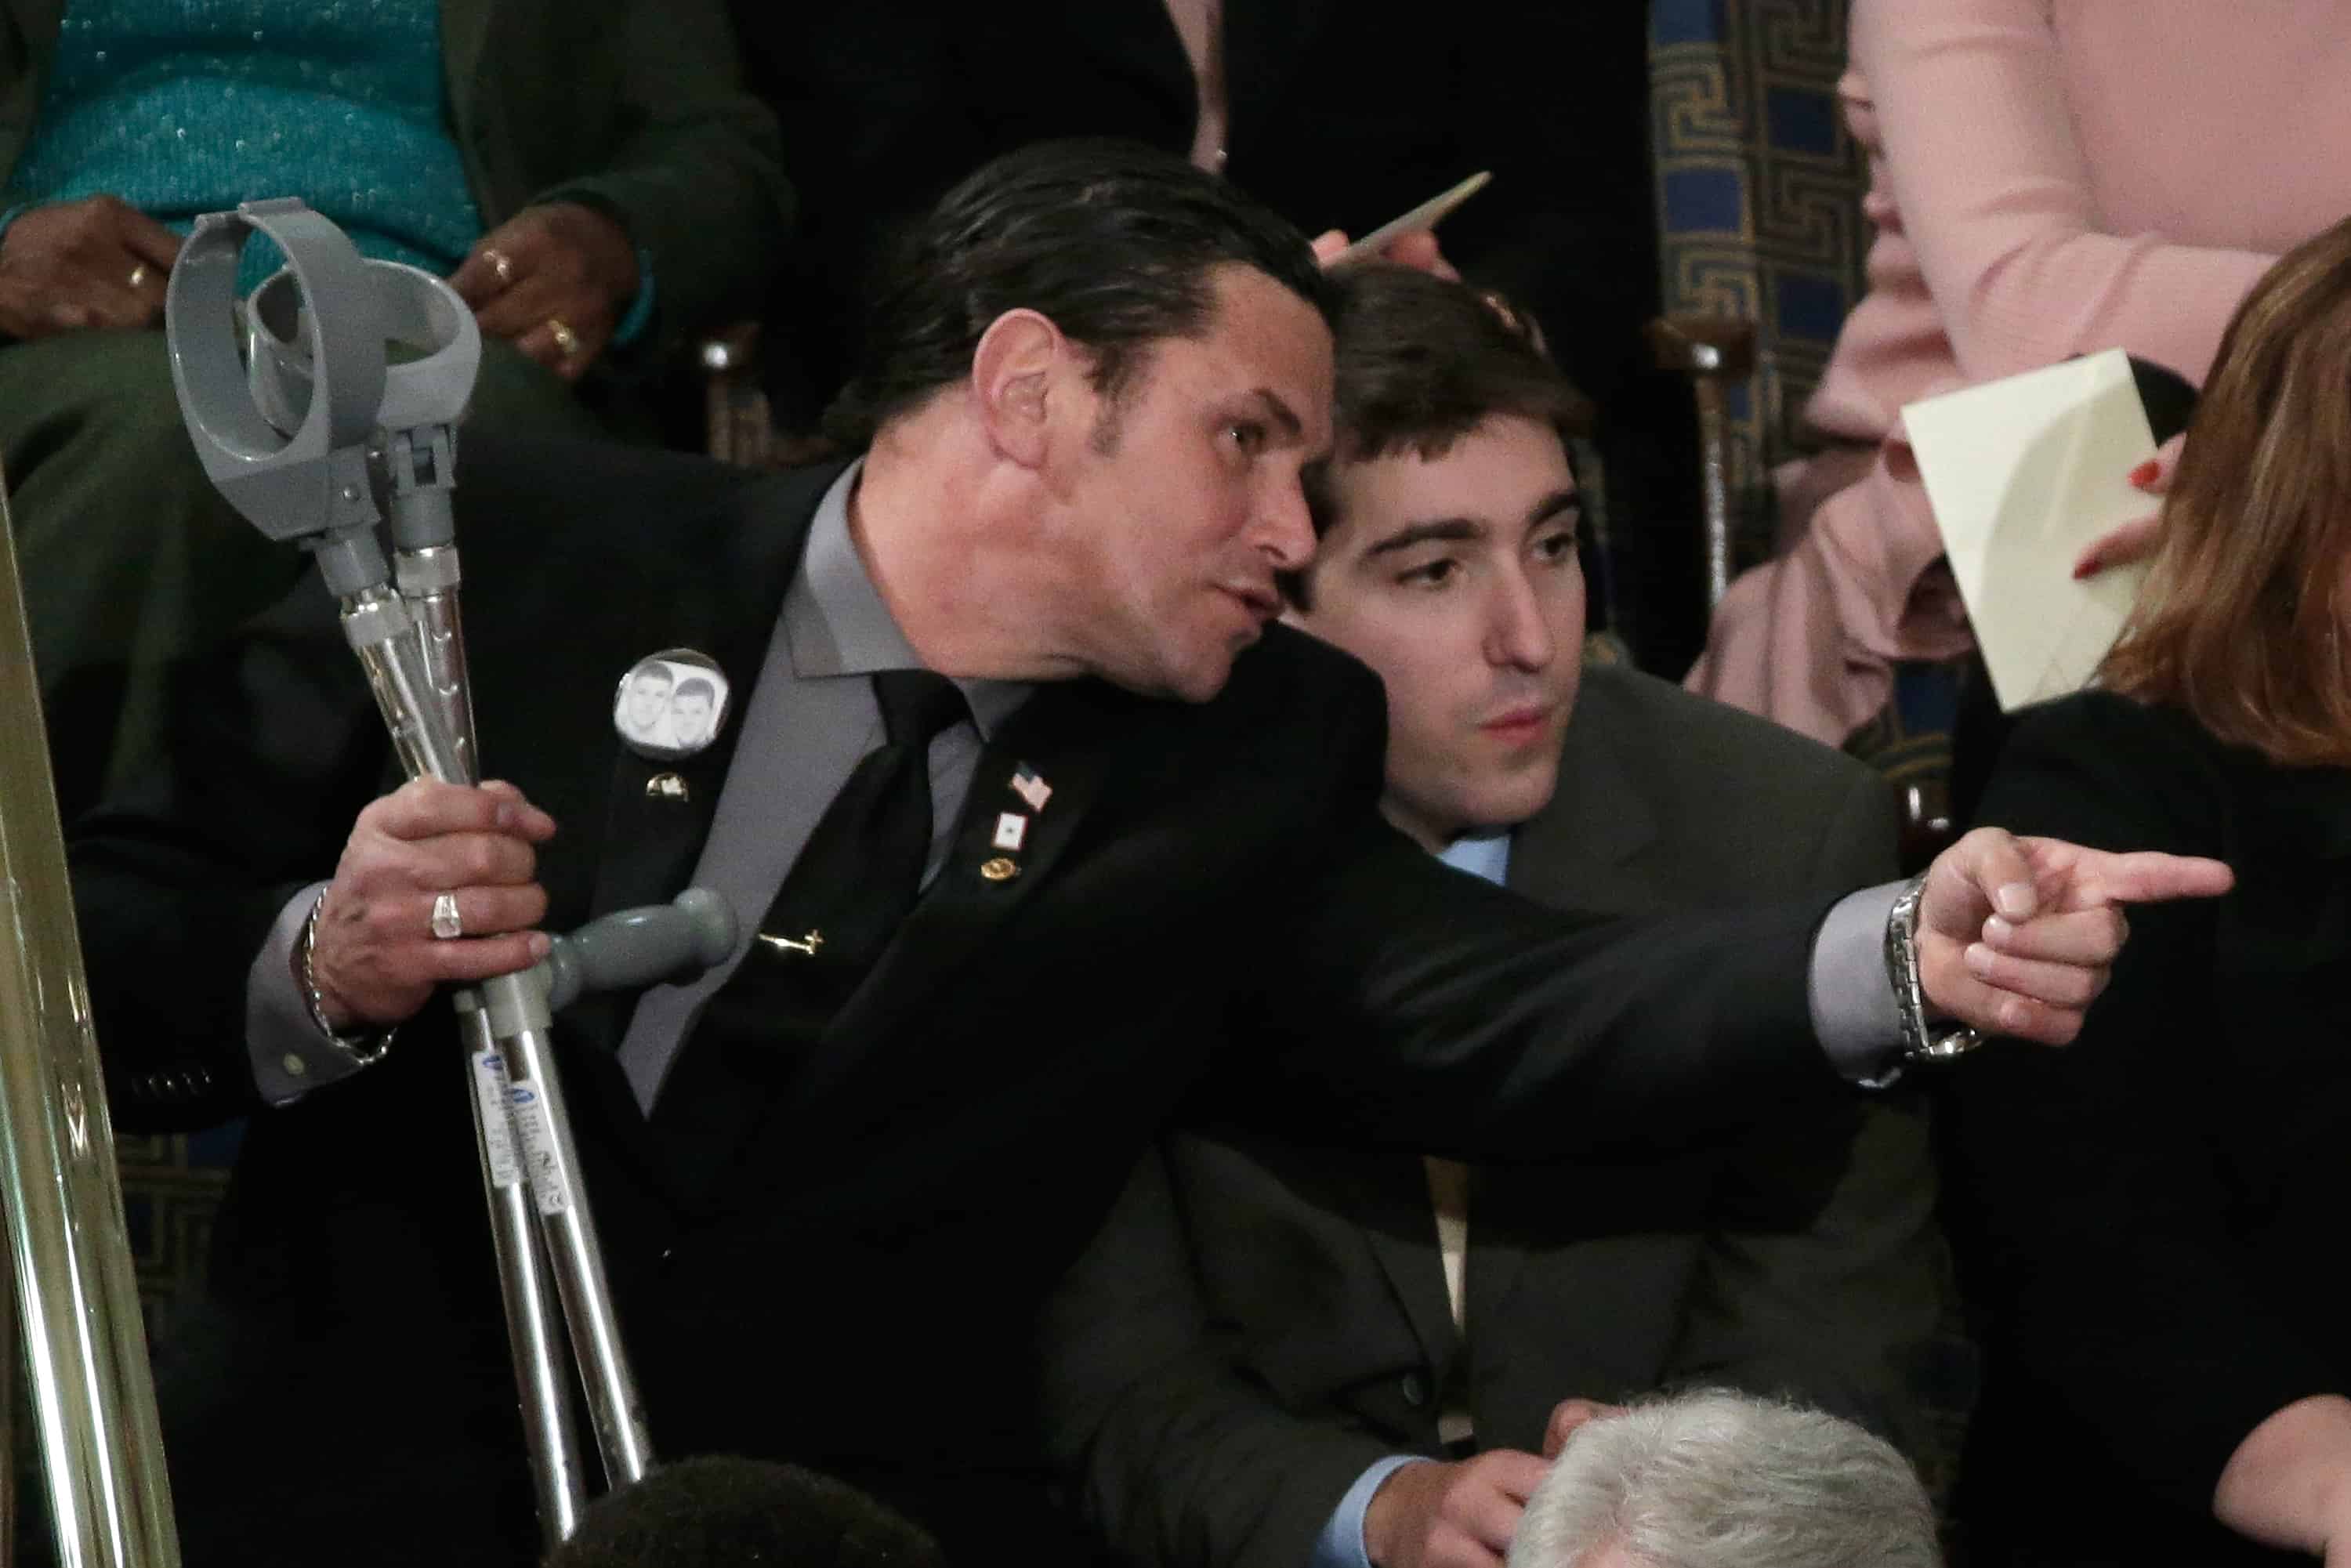 A special Tico guest at the State of the Union